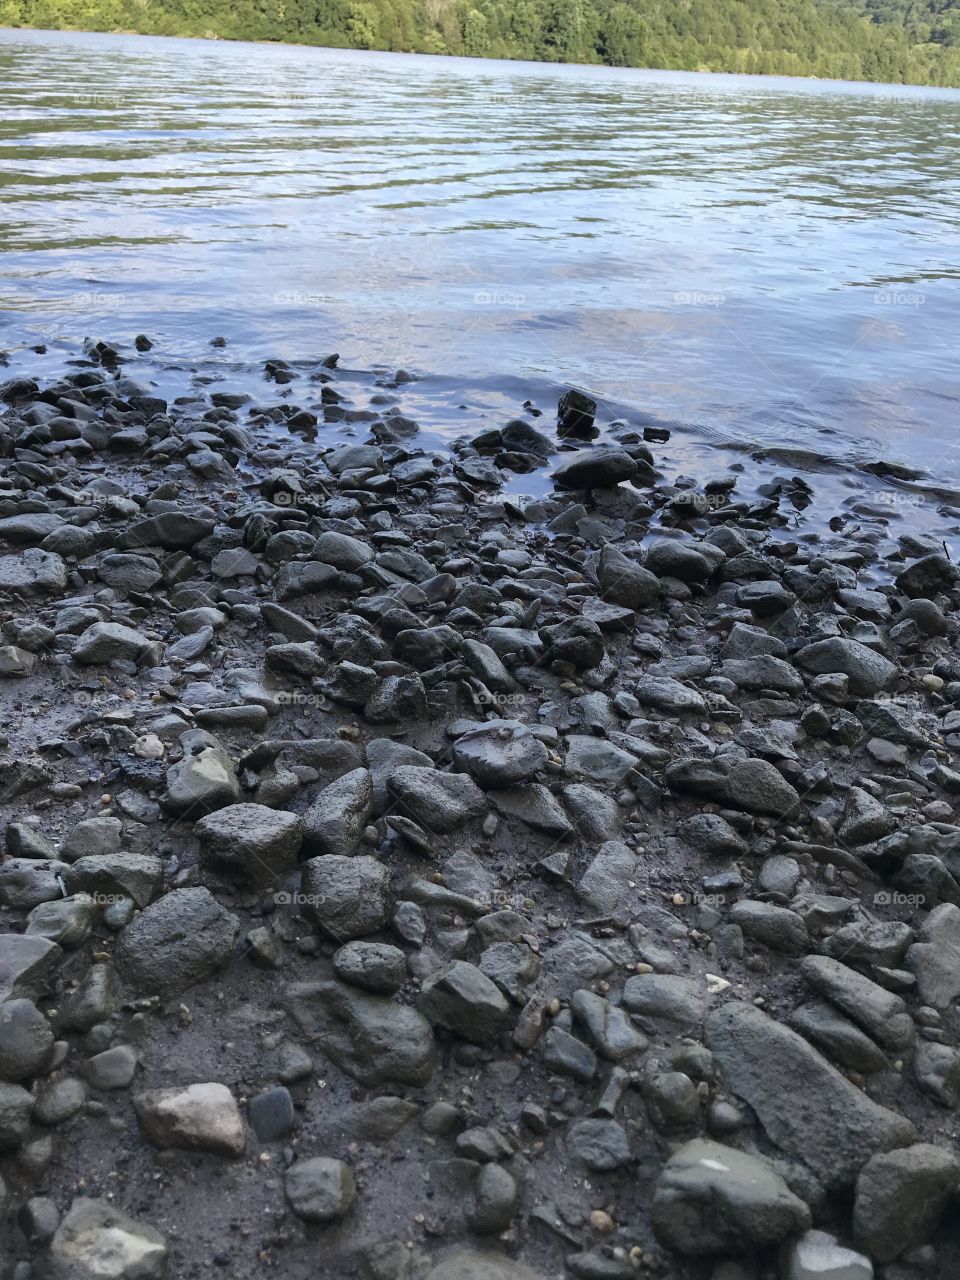 Rocks alongside waterside that caught my eye while traveling with mom